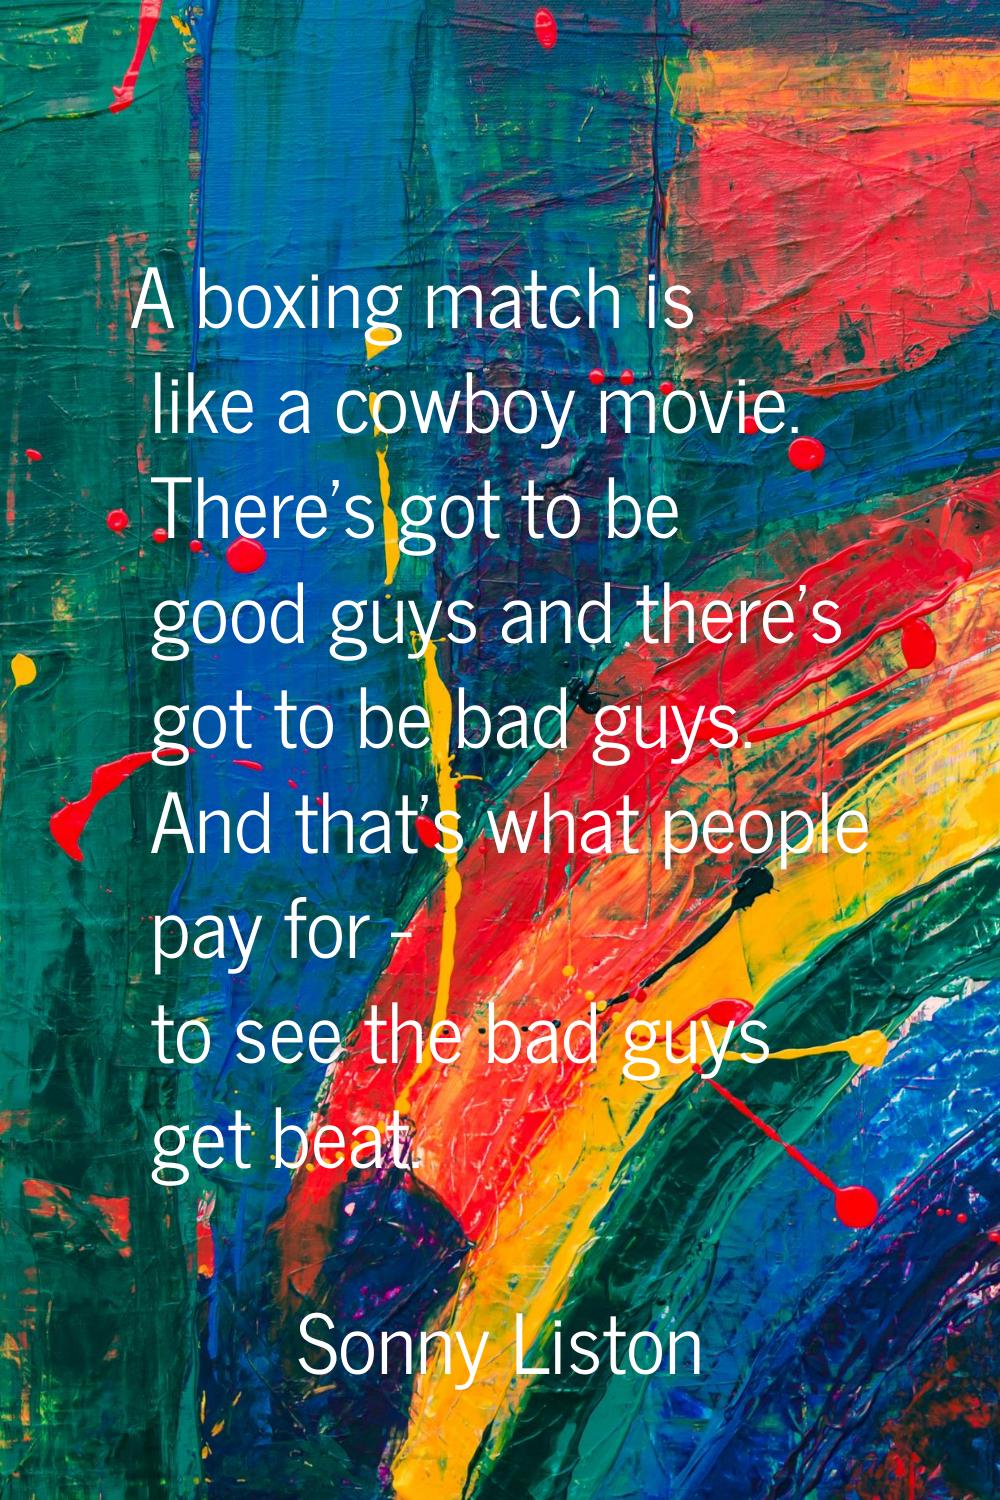 A boxing match is like a cowboy movie. There's got to be good guys and there's got to be bad guys. 